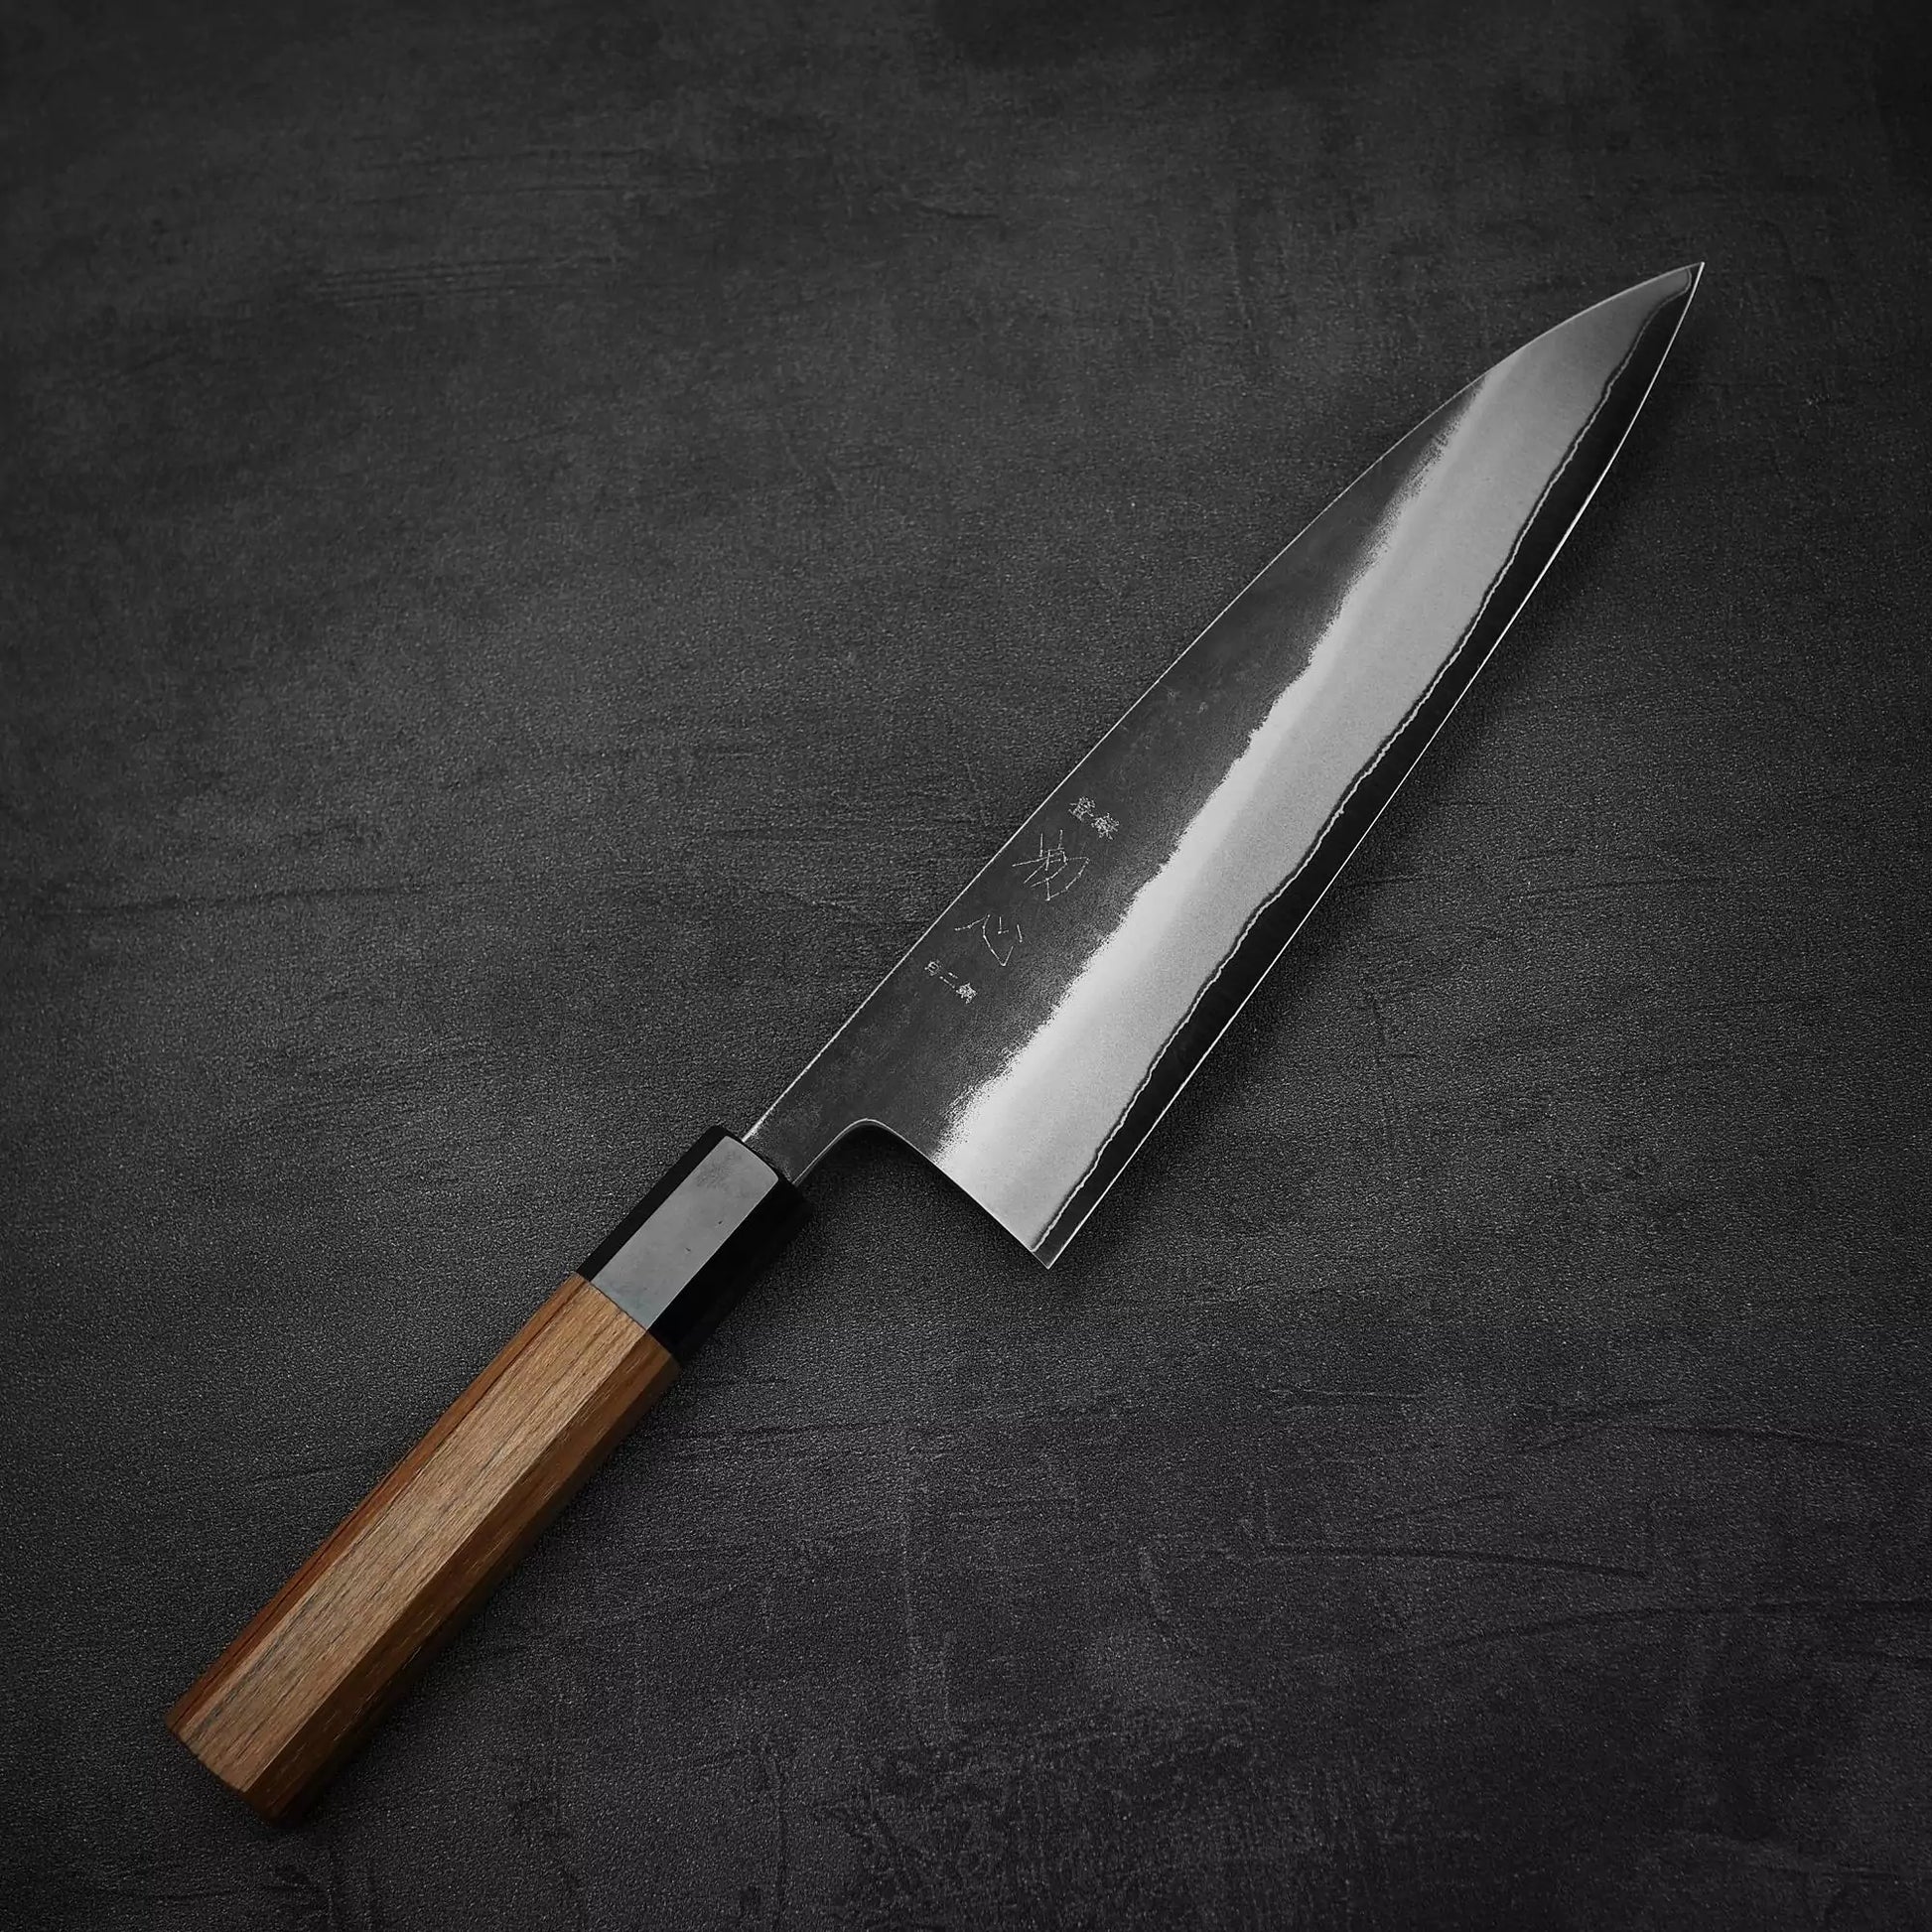 A Beginner's Guide to Japanese Knife Finishes: Kurouchi, Damascus